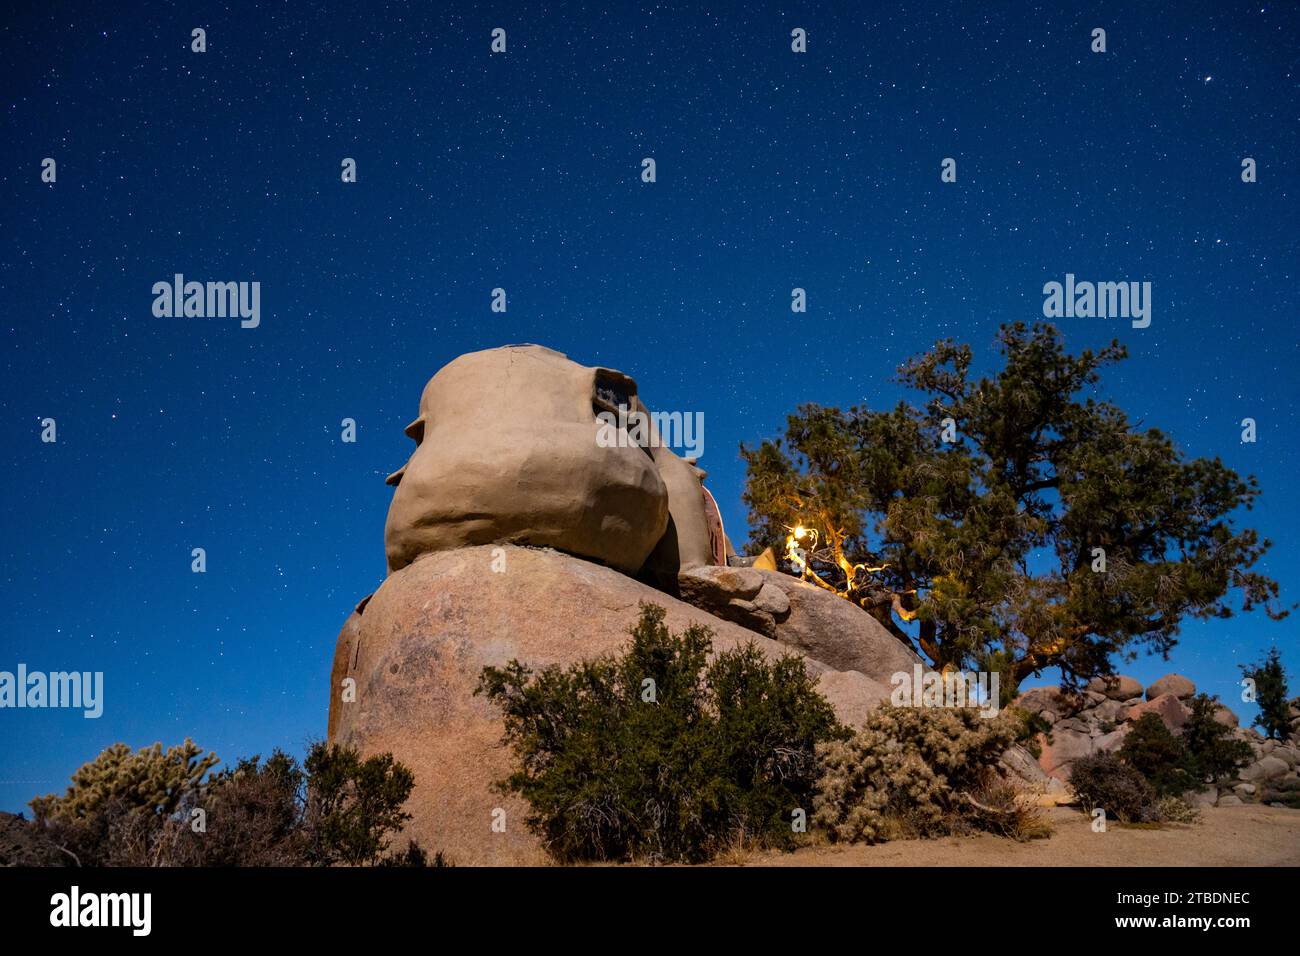 The Cosmic Castle in Garth's Boulder Garden taken during a clear night in the Mojave Desert. Stock Photo